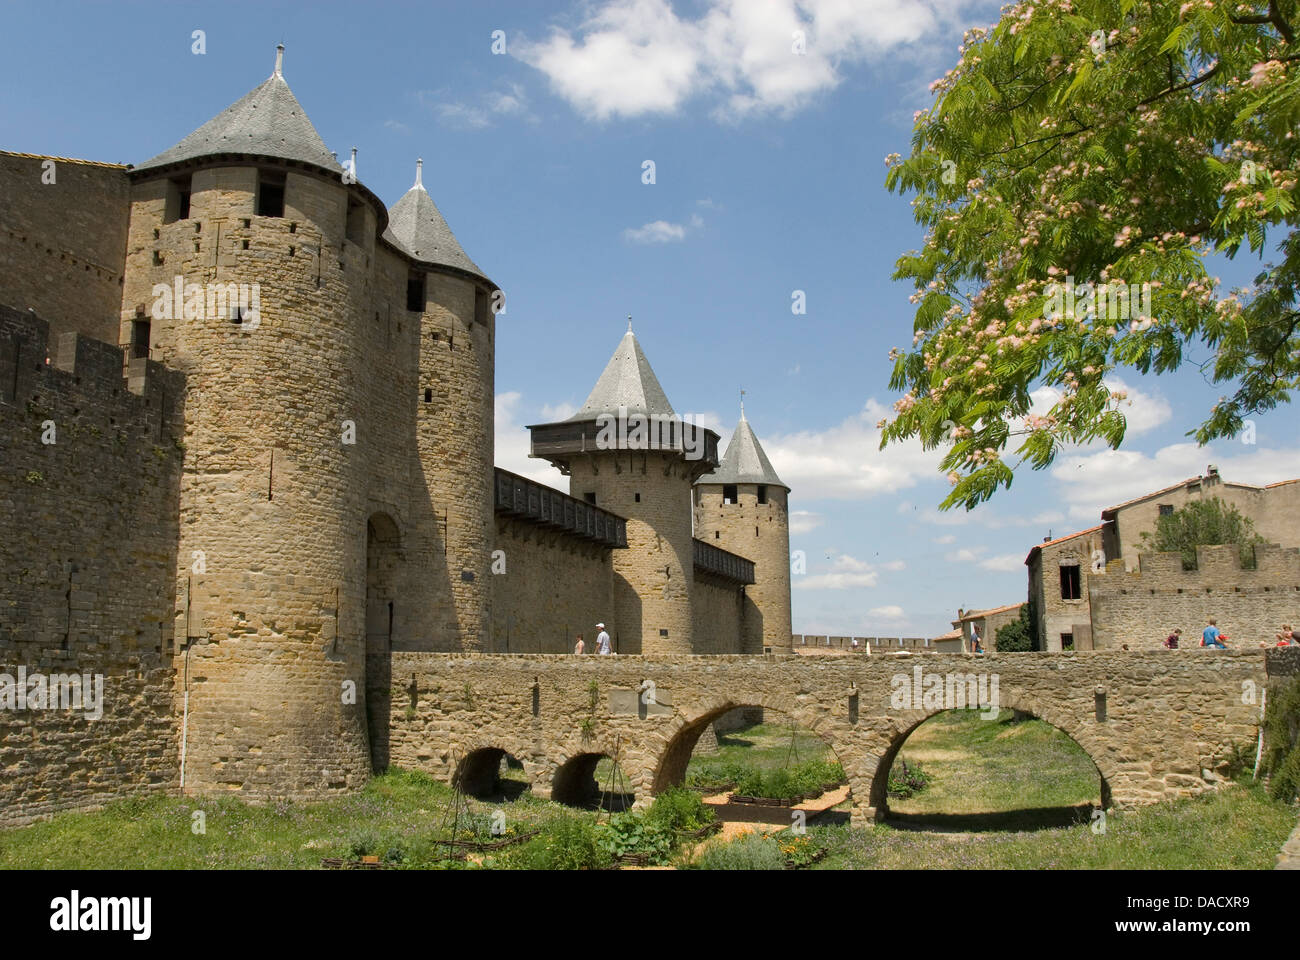 Outer walls of the old city, Carcassonne, UNESCO World Heritage Site, Languedoc, France, Europe Stock Photo